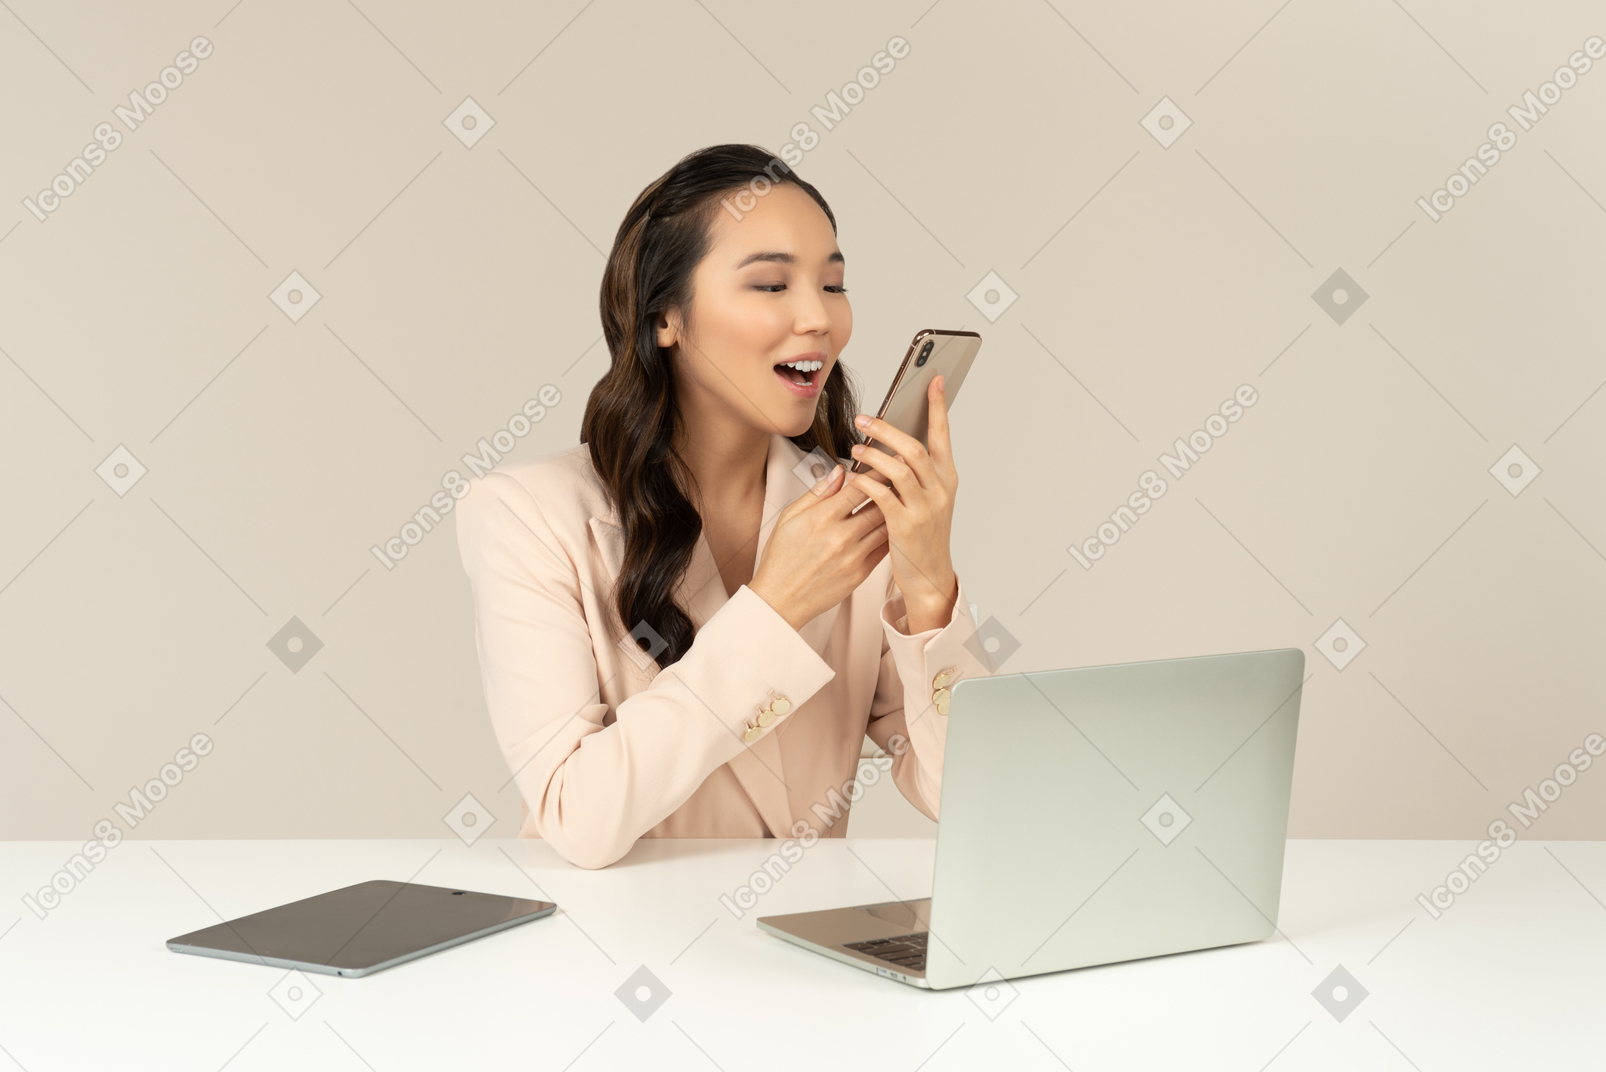 Asian female office worker shouting to smartphone